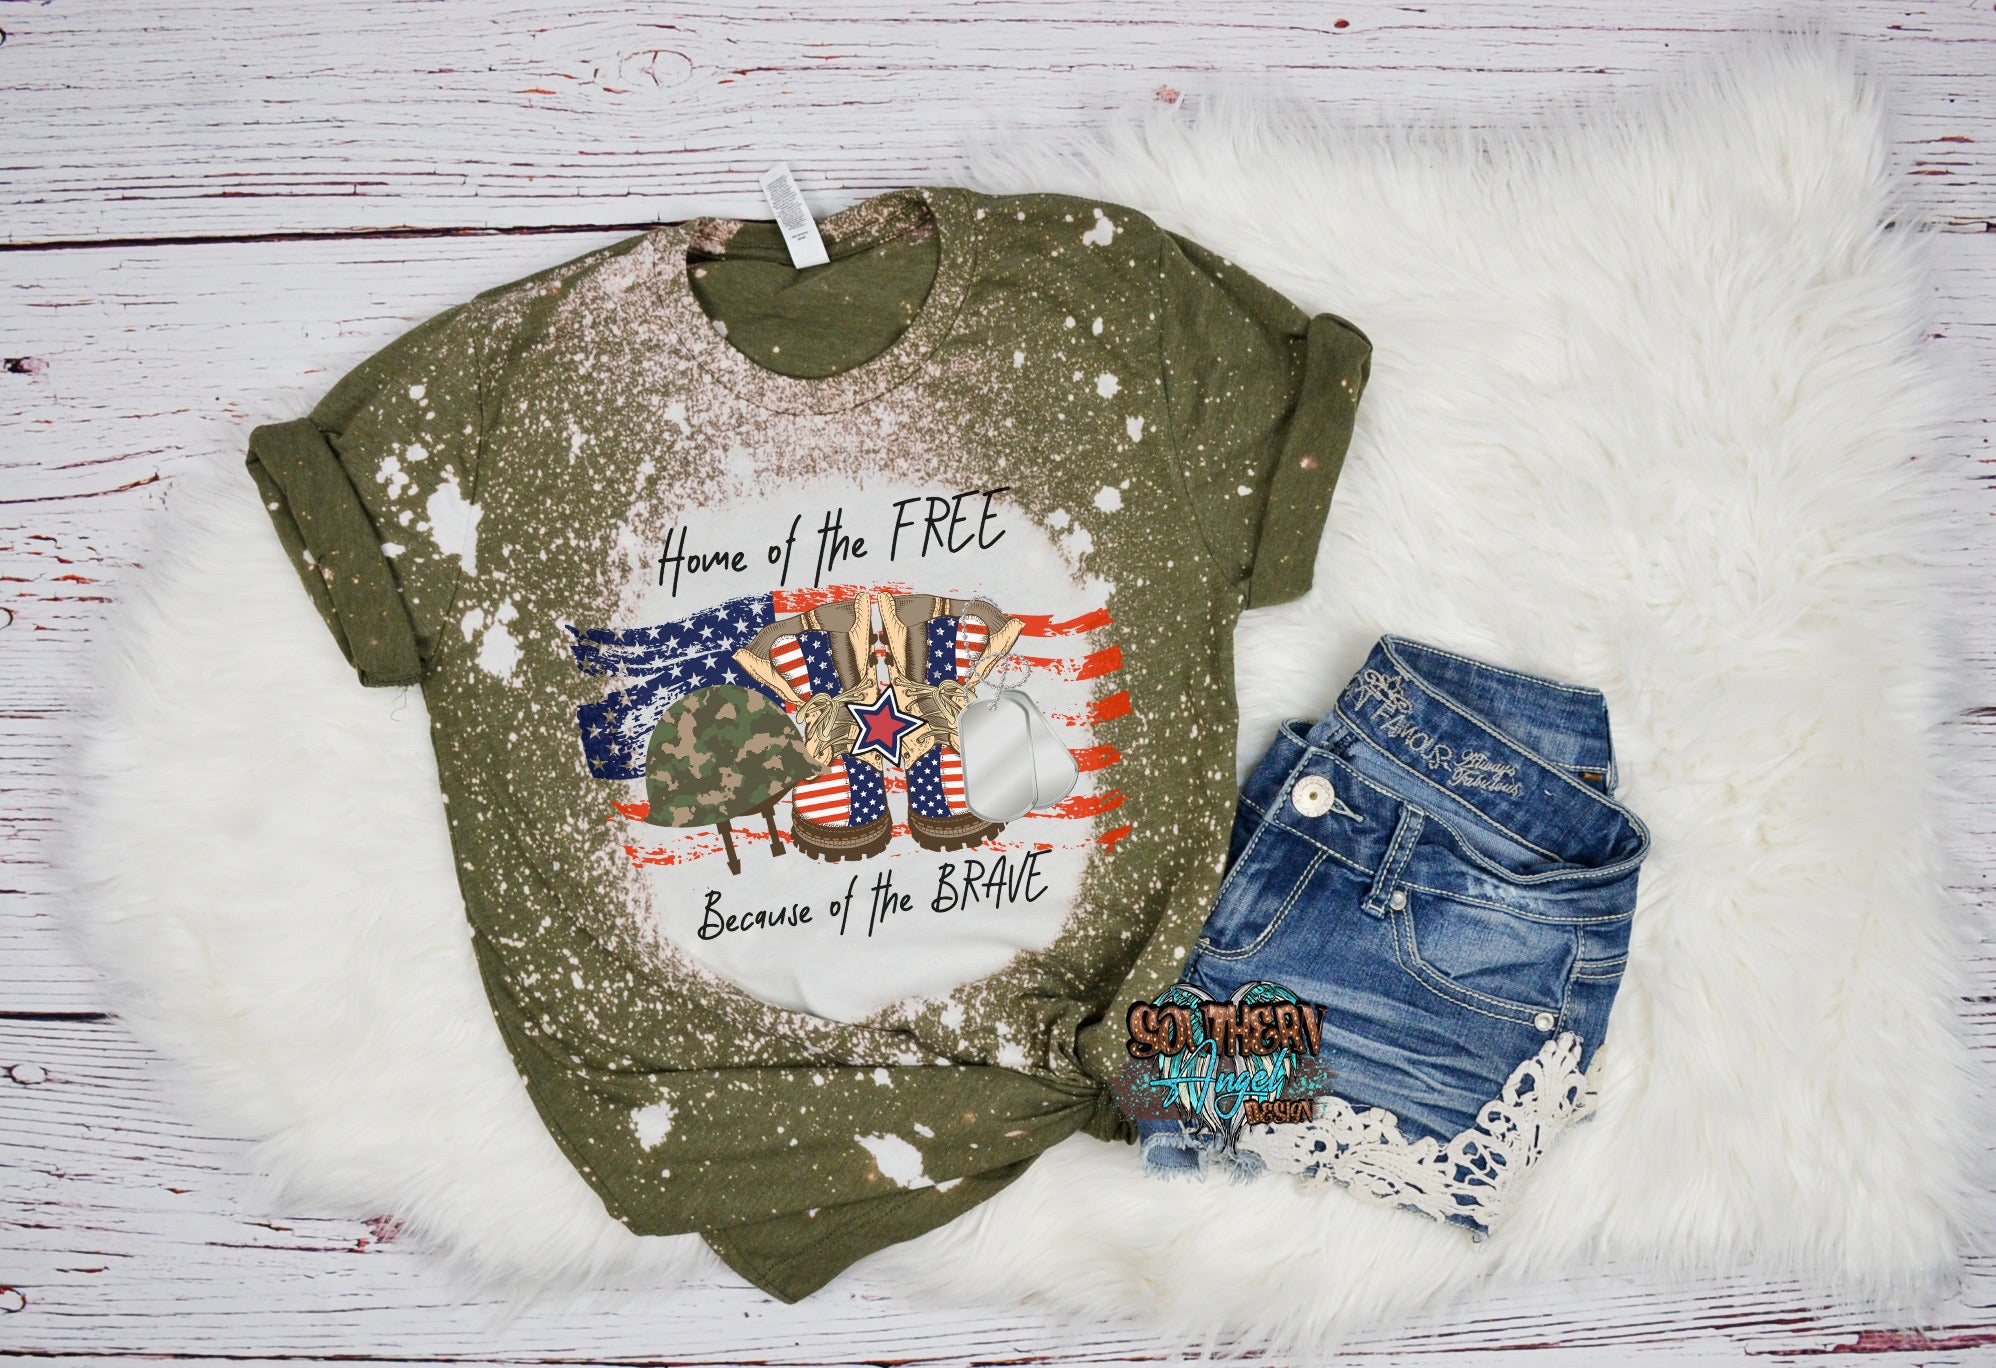 Light Gray Home Of The Free Because Of The Brave bleached t-shirt image_61099dcb-0a7e-403d-ba82-20f5eac8a90c.jpg copy-of-military-mom-bleached-t-shirt Adult Patriotic